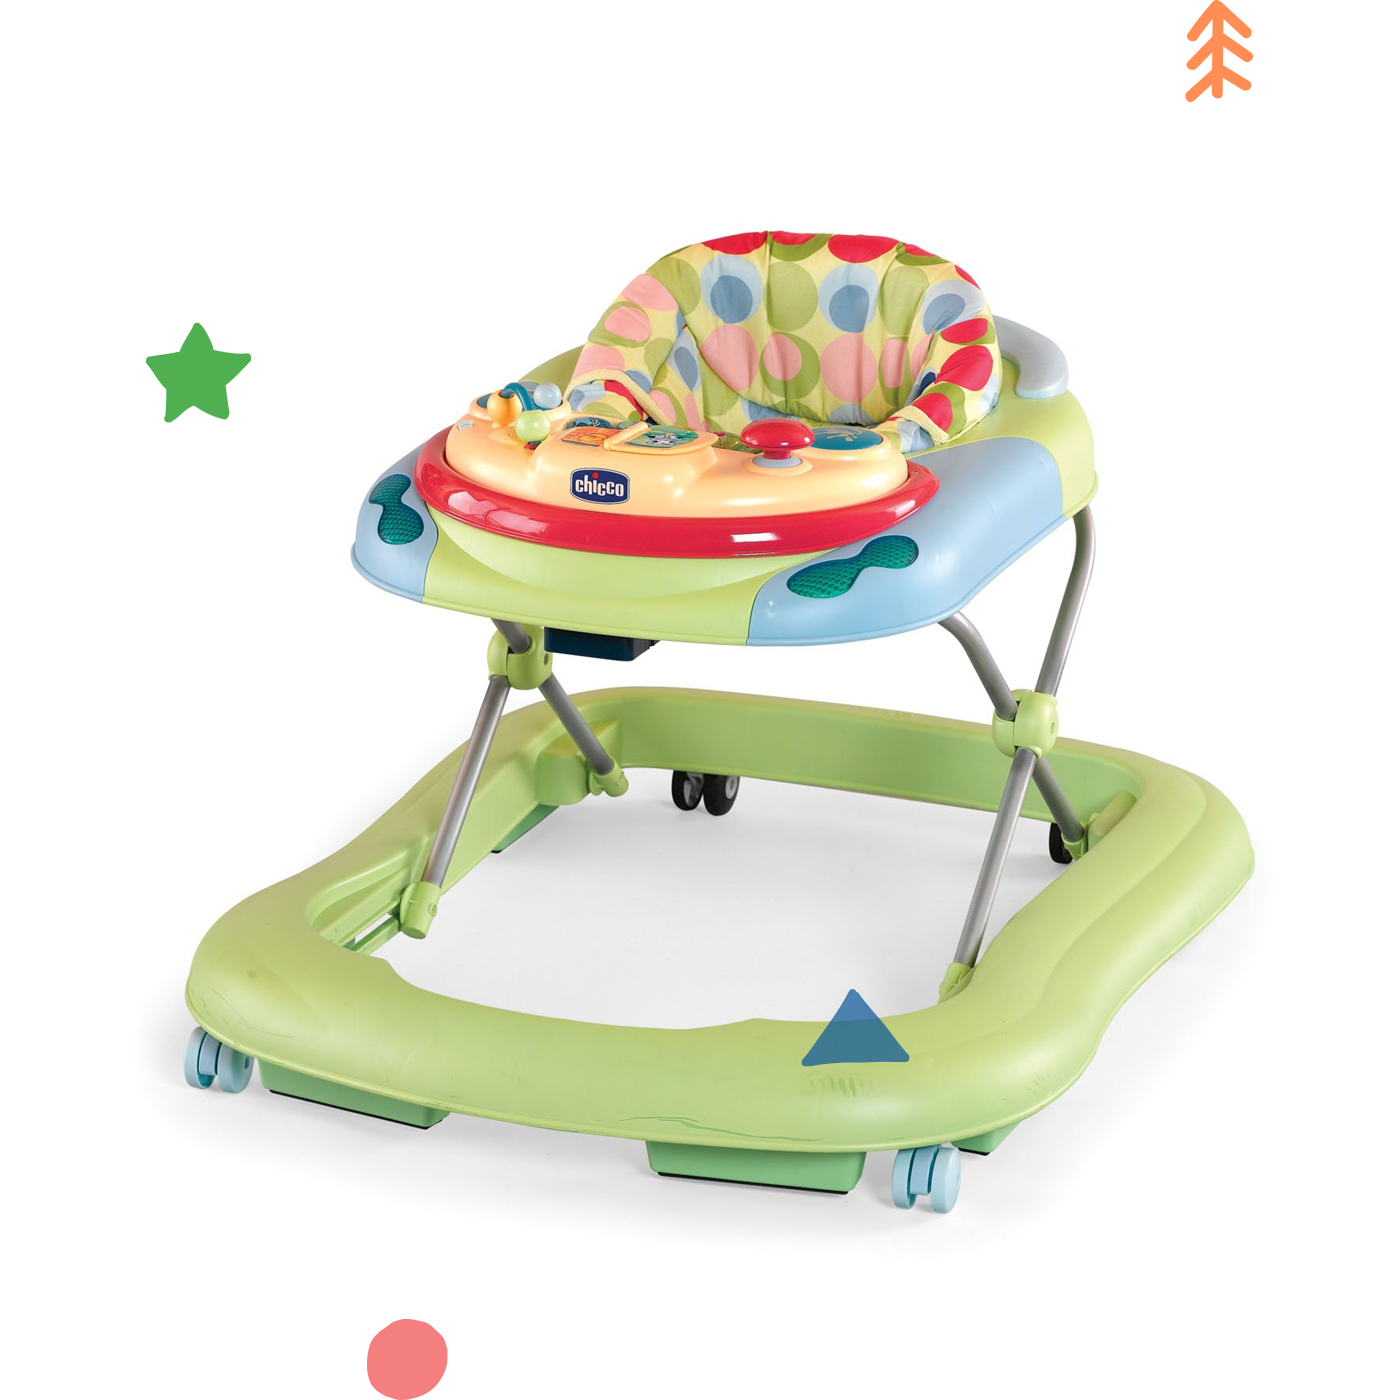 Chicco Baby Walker, toy box club, bigger toys,